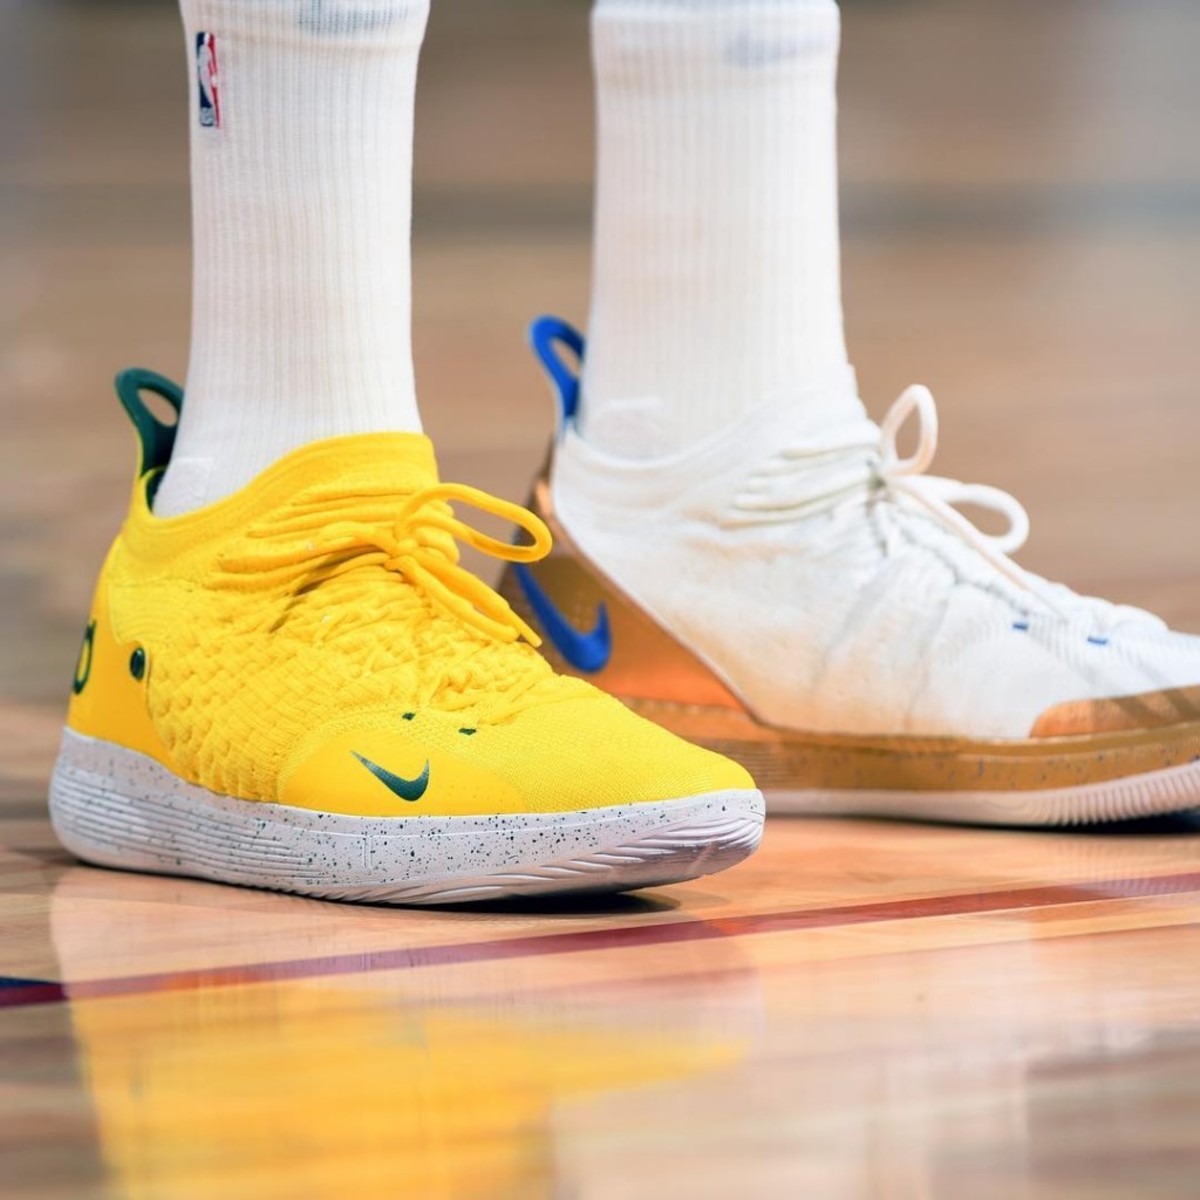 Top 10 Best Looking Basketball Shoes This Season - NBA ...